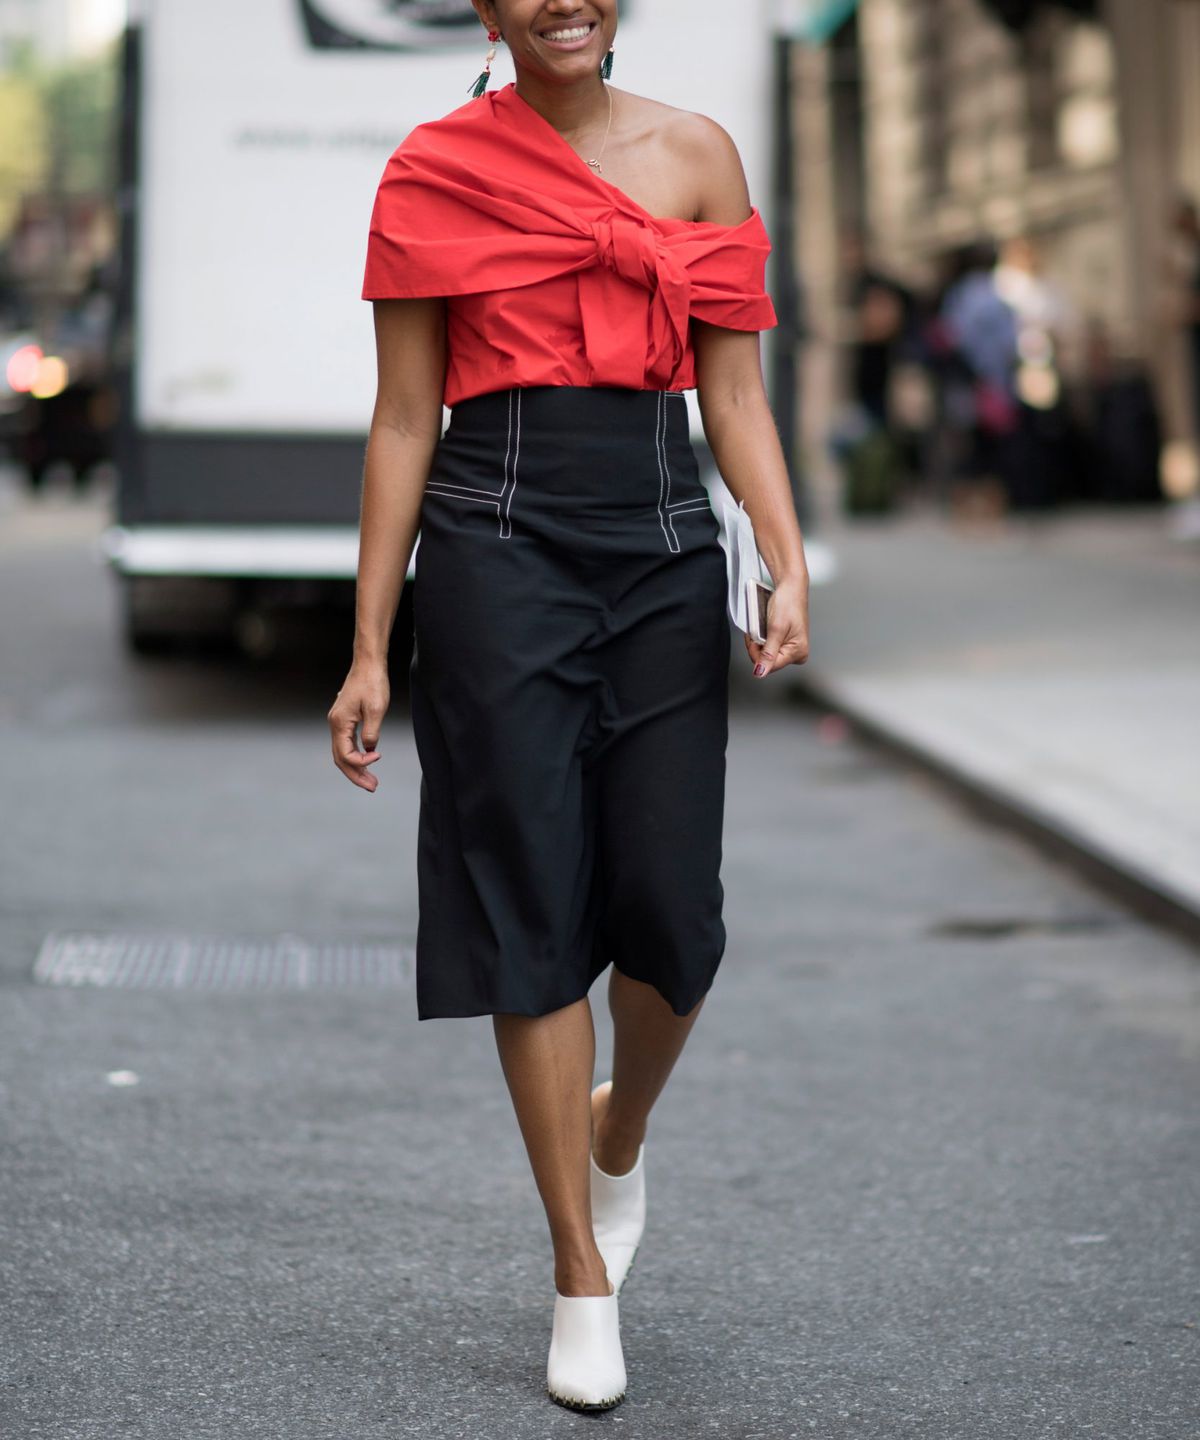 Consider the one-shoulder top